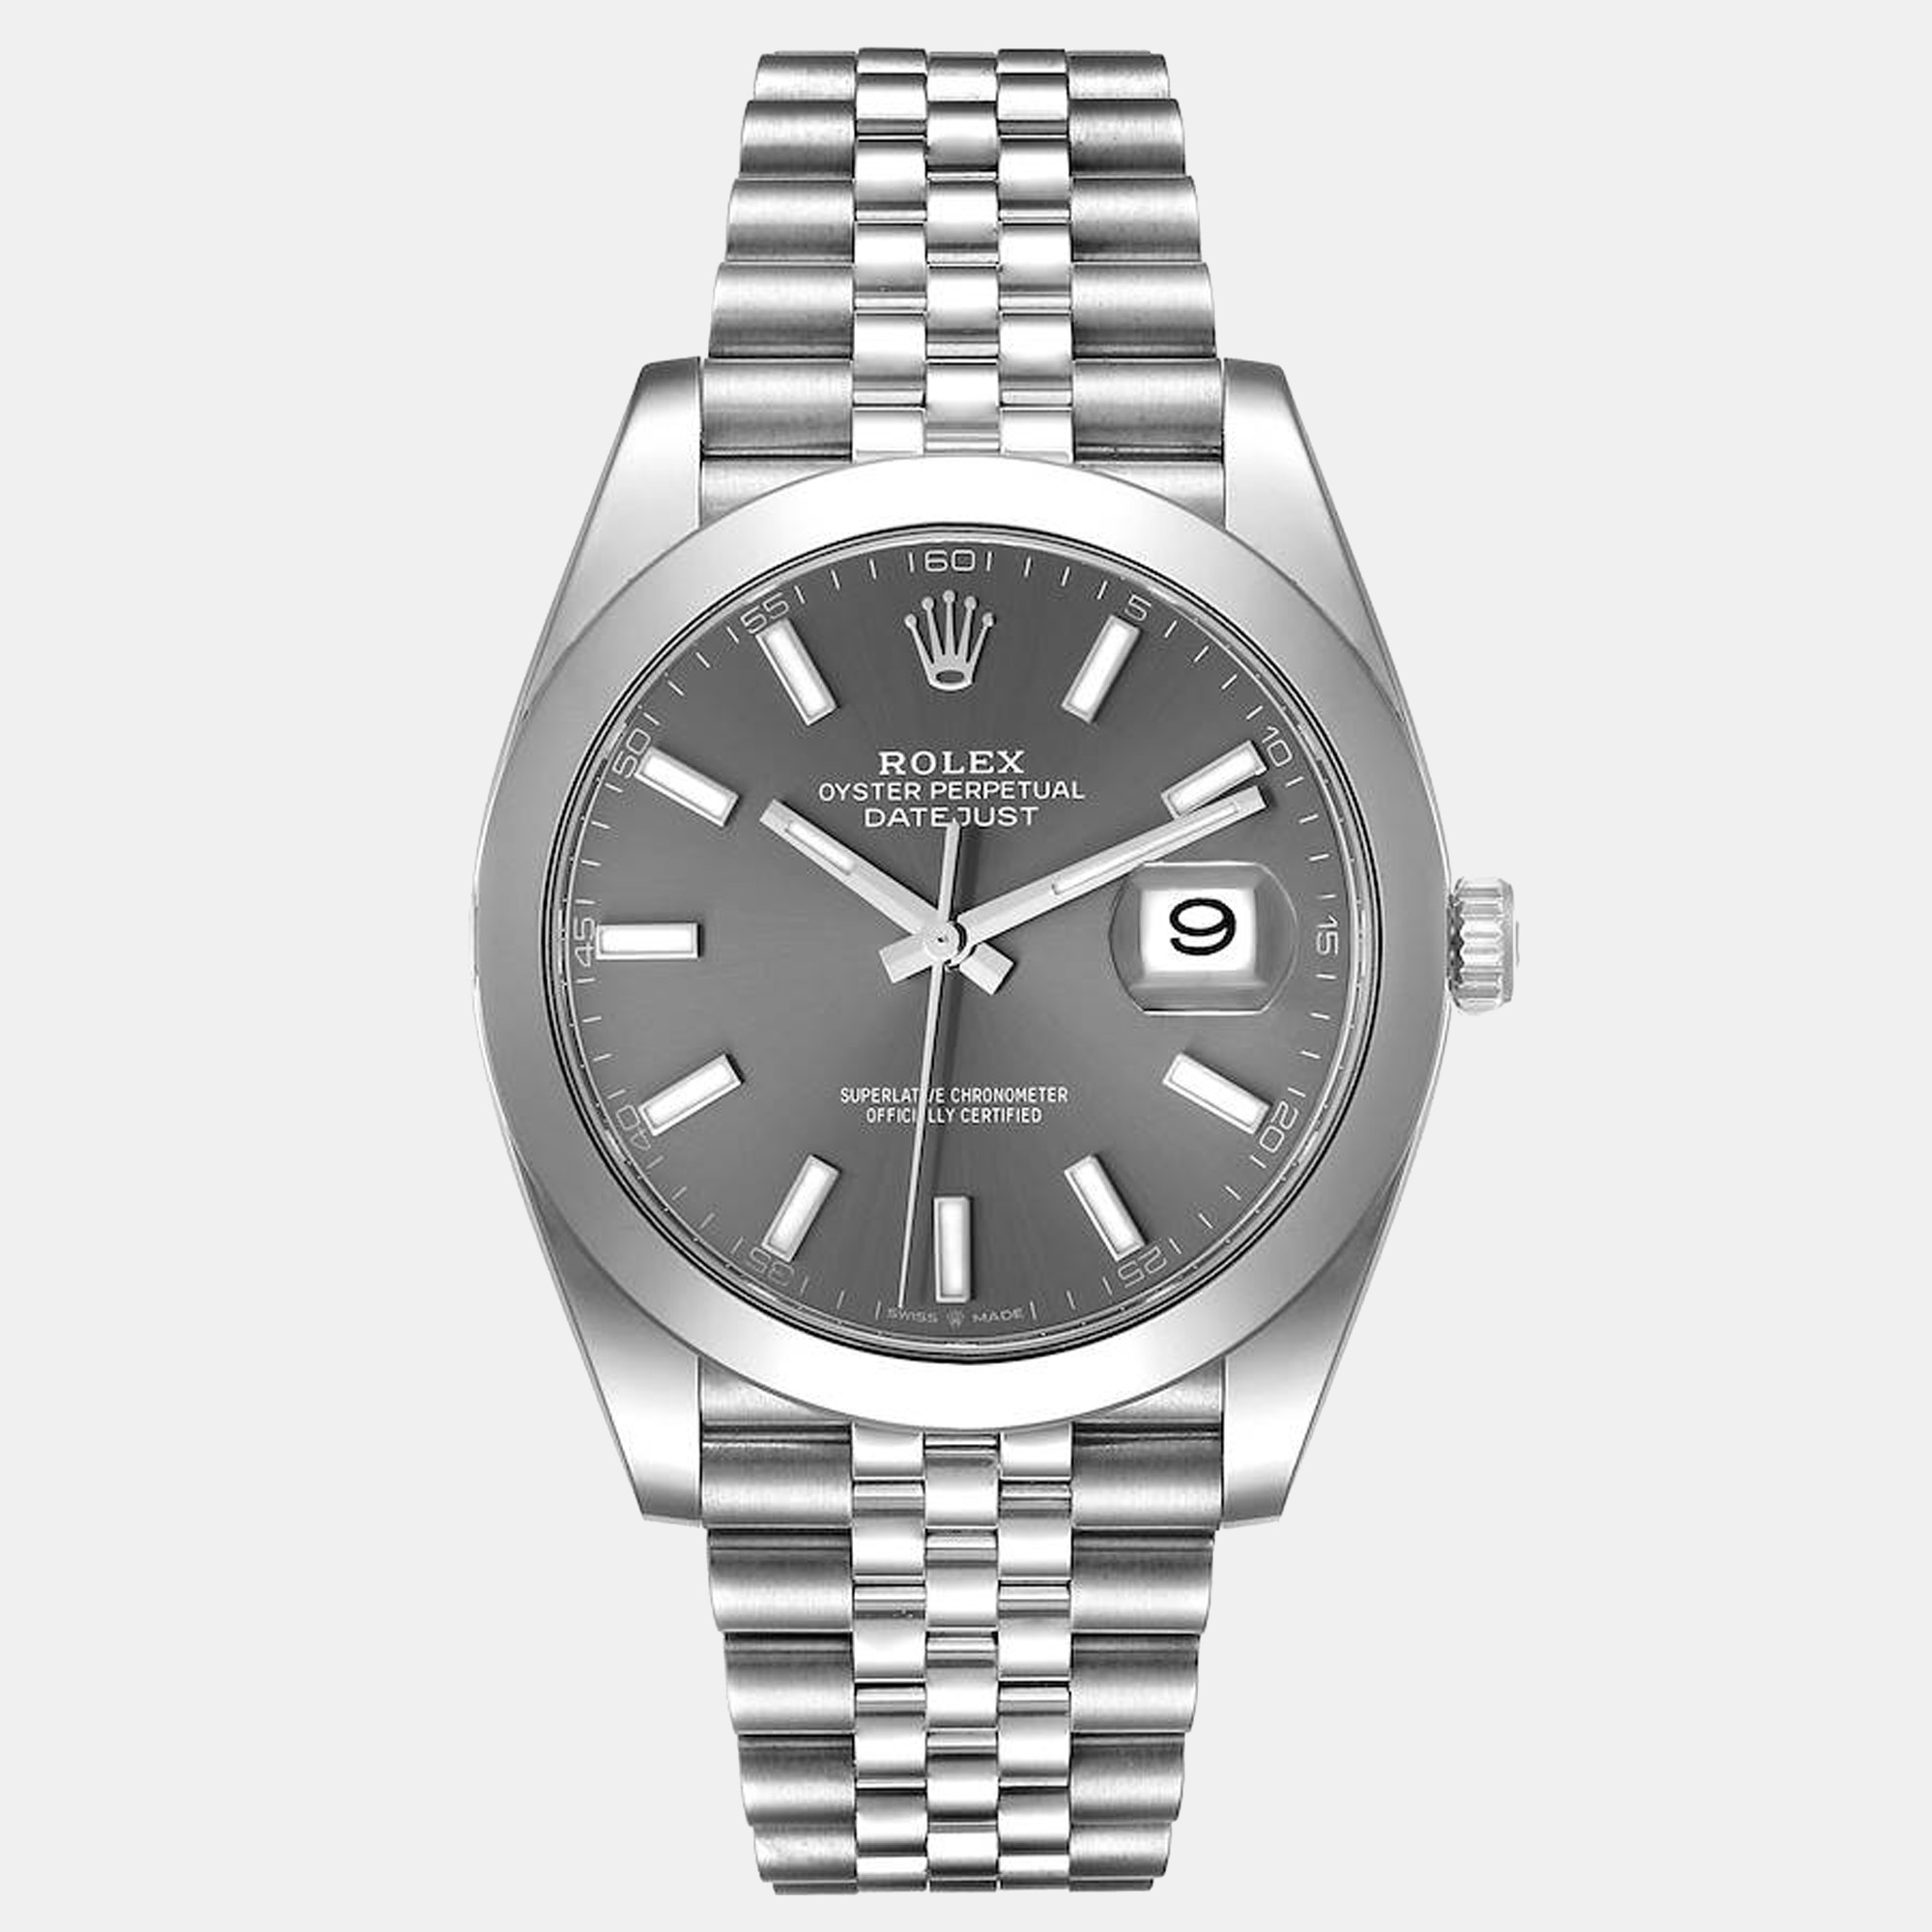 The Datejust is one of the most recognized and coveted watches from the house of Rolex. It has a distinct look and an irrefutable appeal. Crafted beautifully this authentic Rolex Datejust wristwatch has the signature allure and the promise of enduring quality.